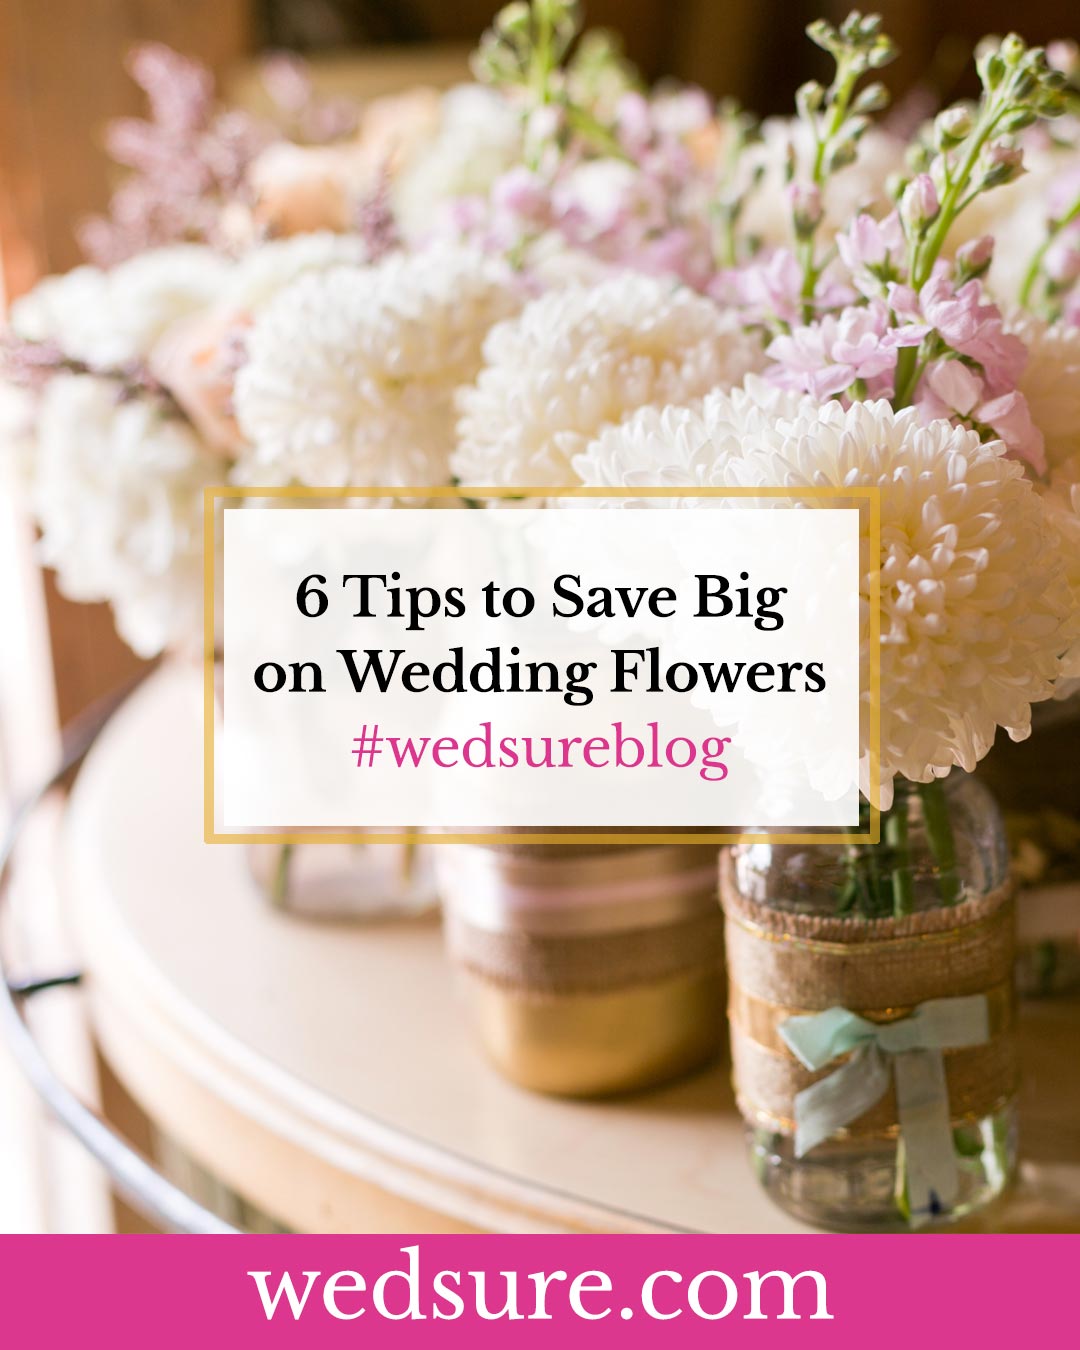 Top 6 Tips to Save Big on Your Wedding Flowers